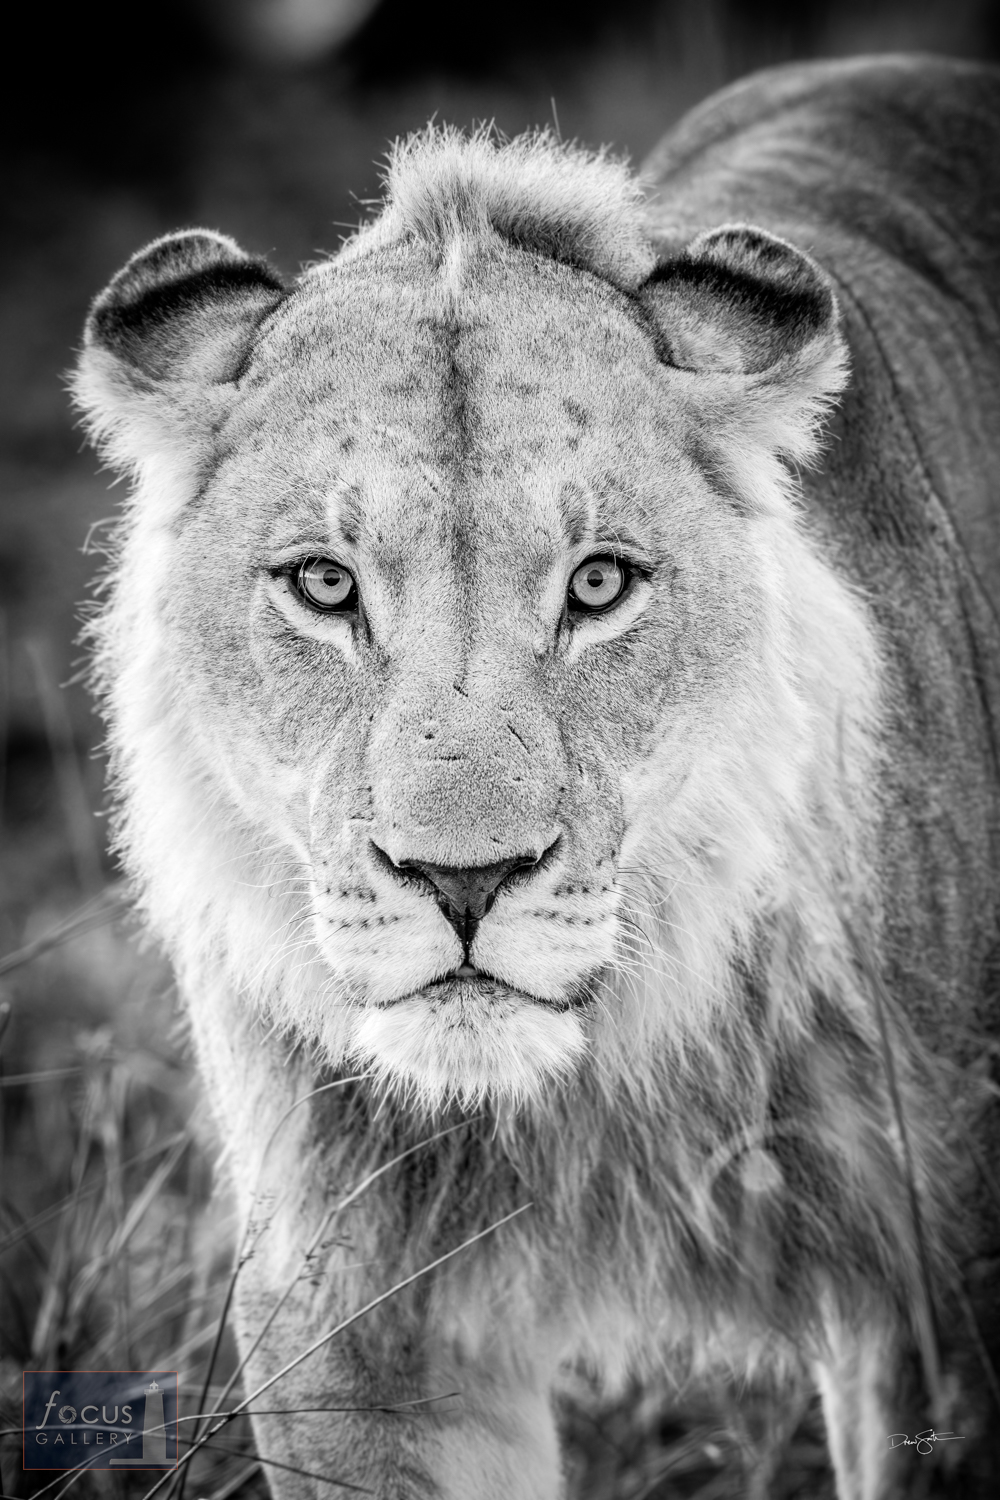 On our last morning game drive in Botswana we were treated to a long visit with this young male lion.  We spent over an hour...